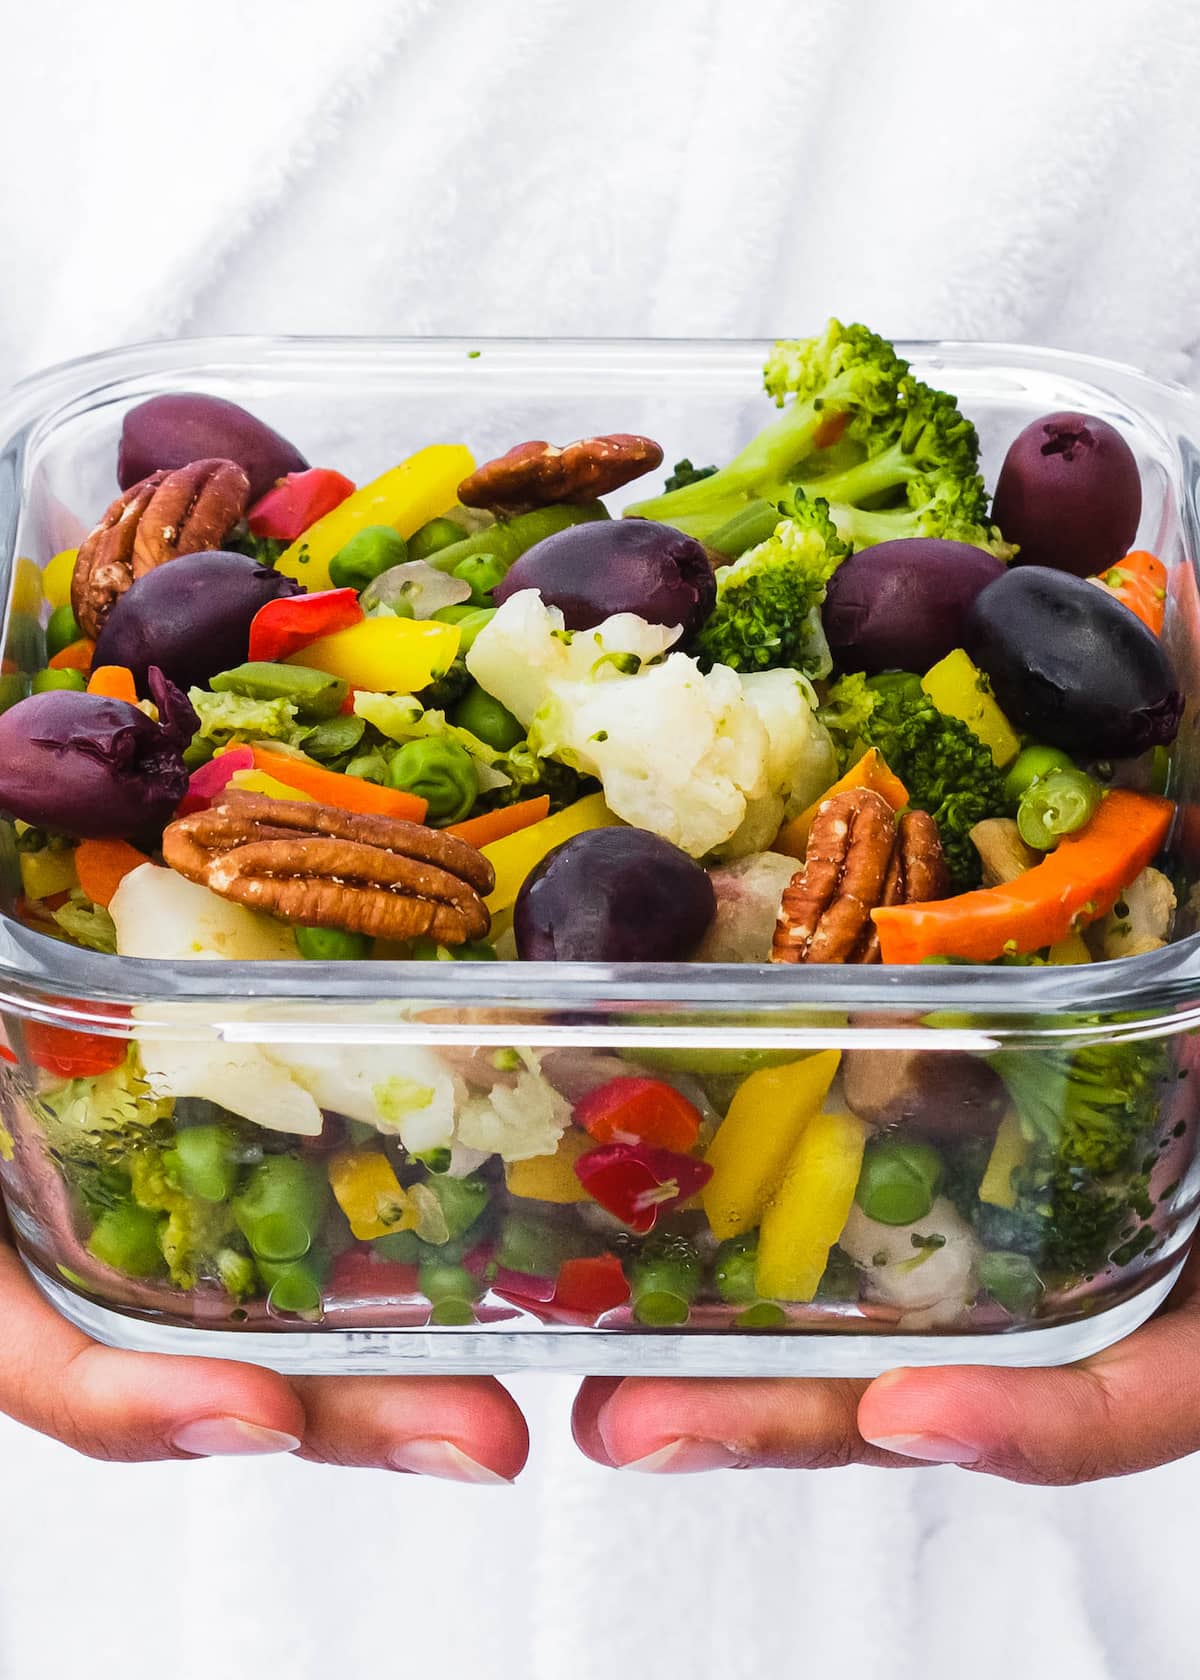 A clear glass container full of steamed veggies, pecans, and grapes.